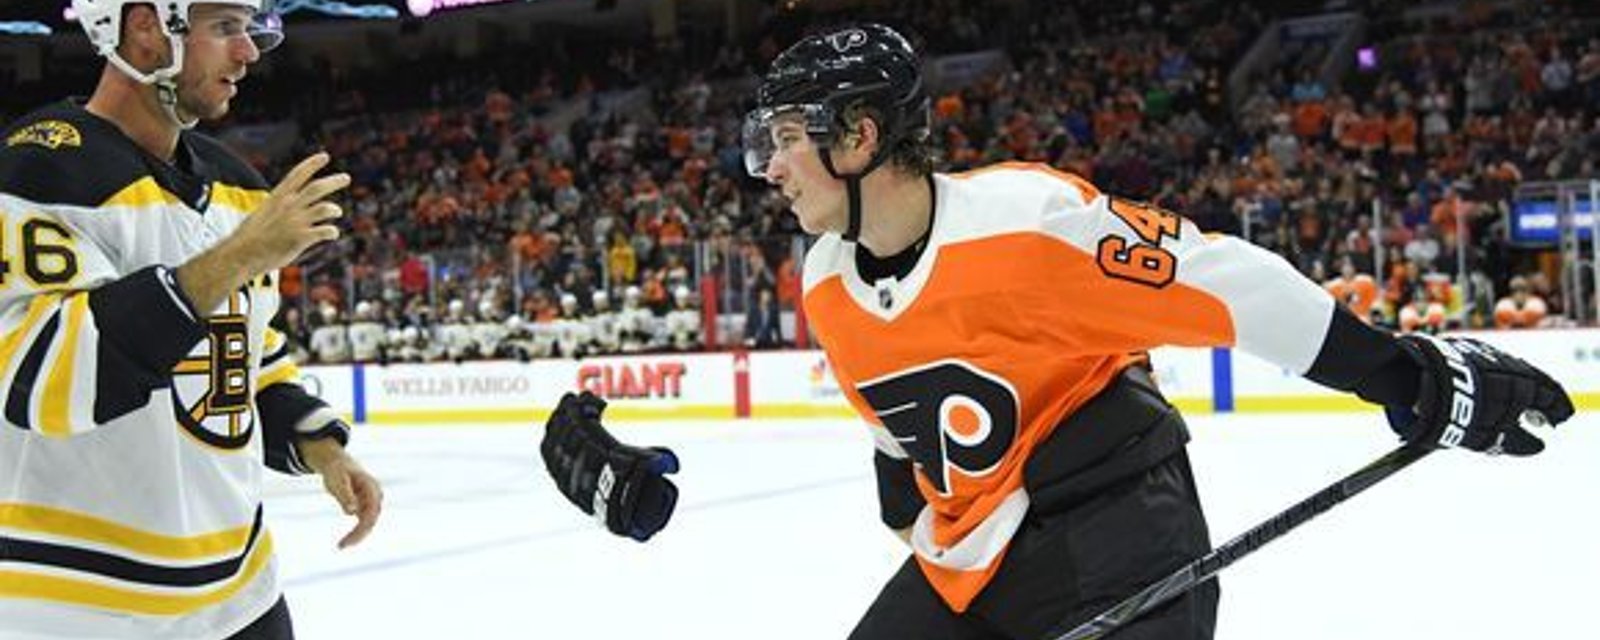 Must see: Patrick earns Flyers fans' respect by dropping the gloves! 